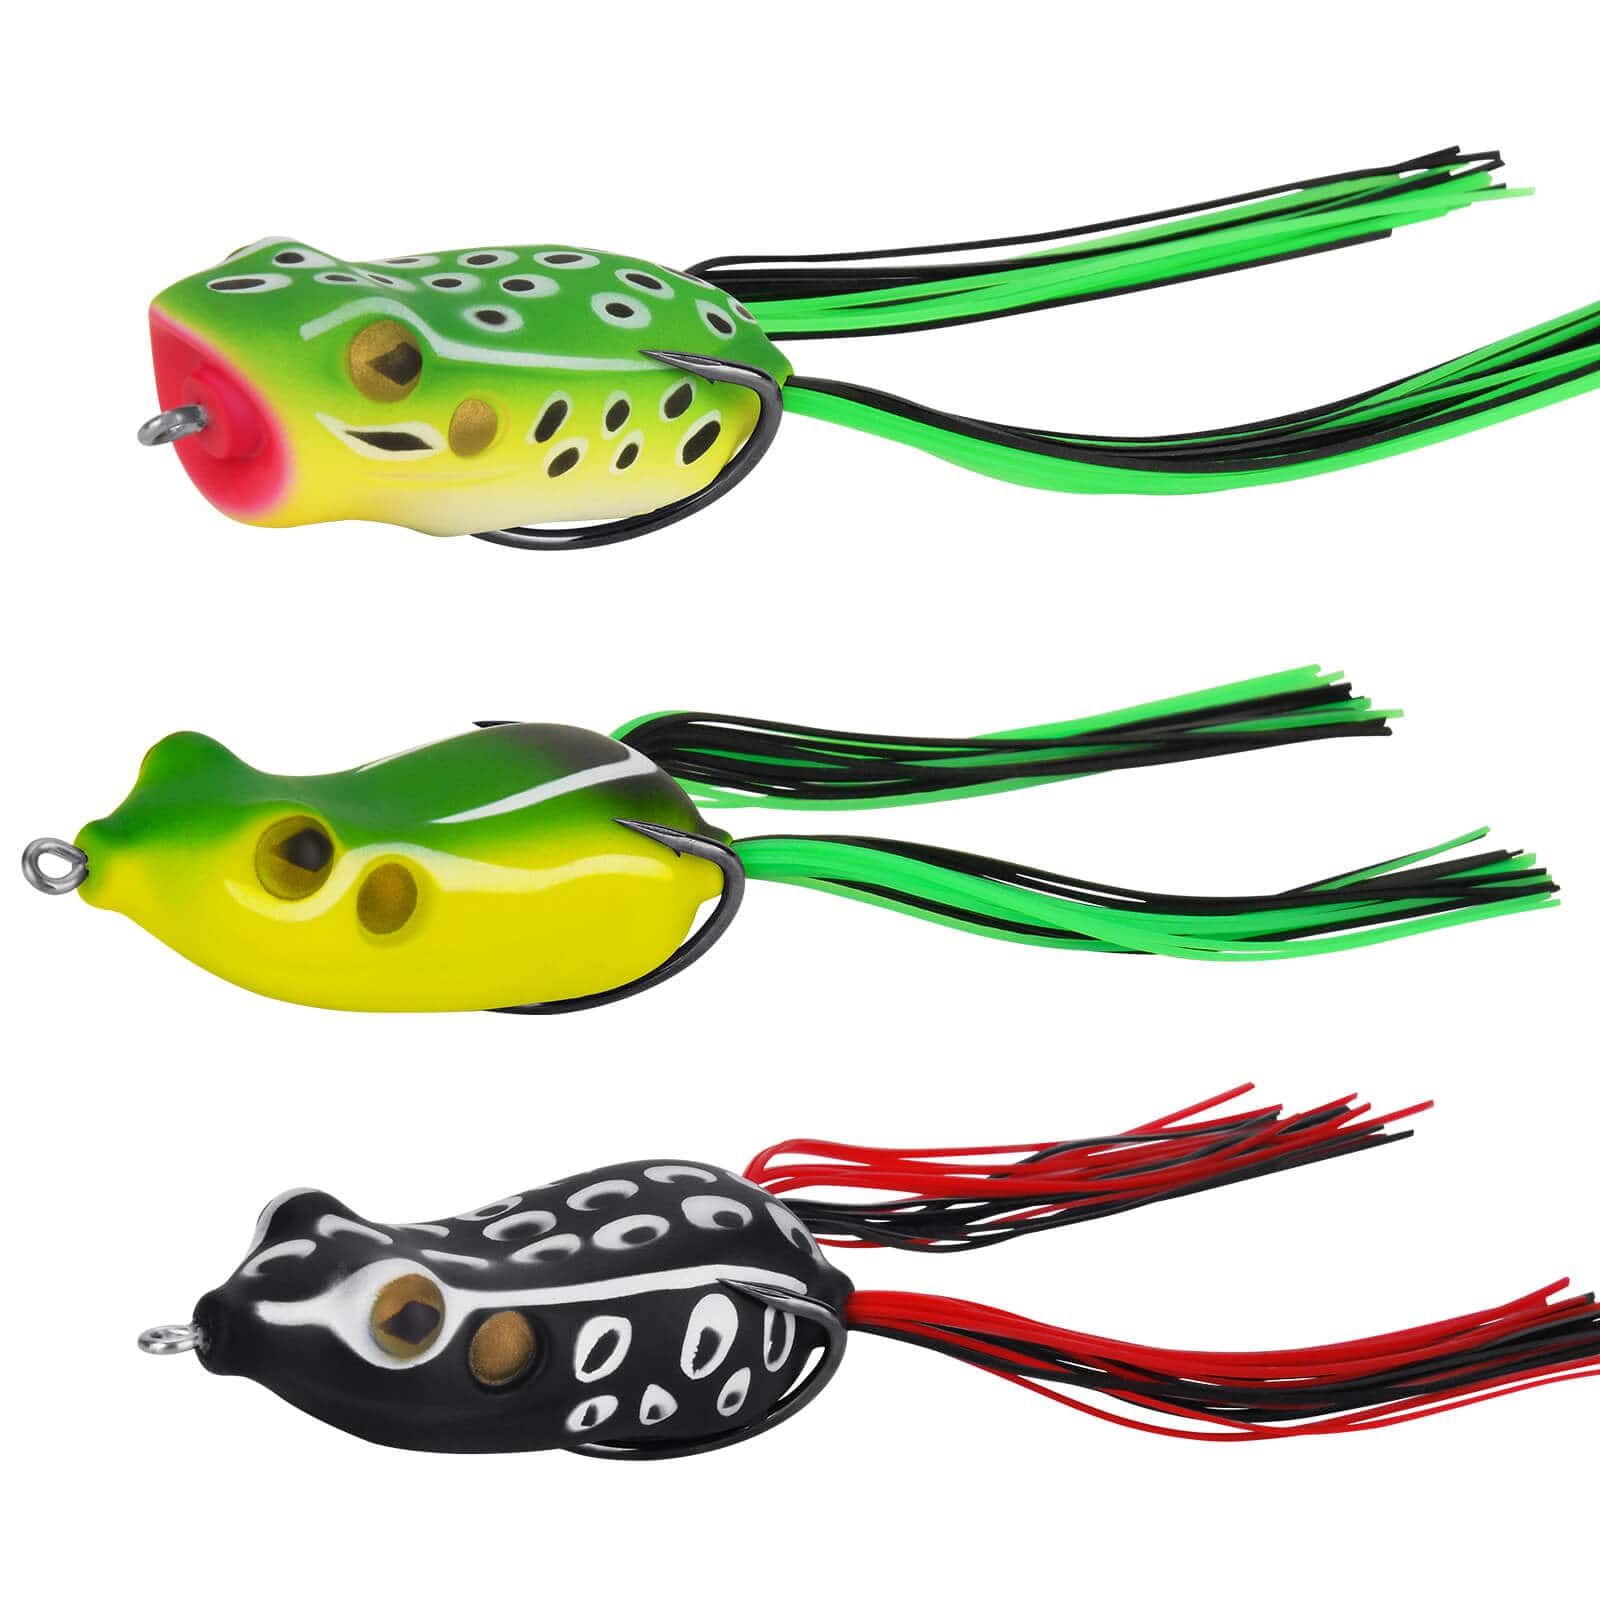 Frog Lure, Frog Fishing Set, with Fishing Hooks +Connectors Frog Lure Kit,  Fish Tackle Frog Baits, 13X6.5X2.2Cm Sea/Fresh Water for Fishing Lover